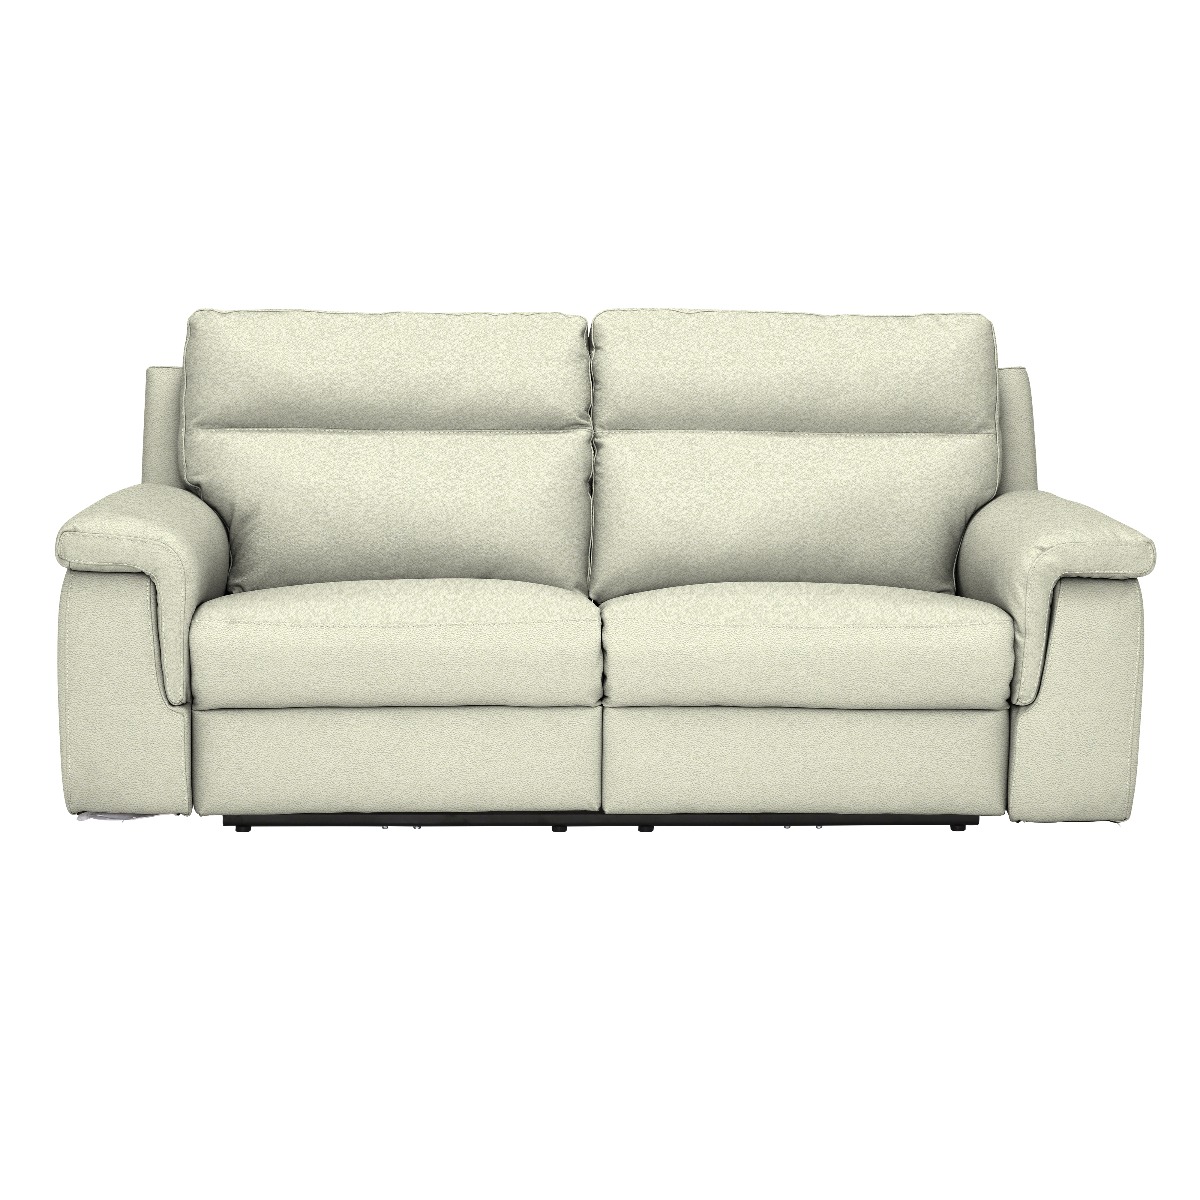 Fulton 3 Seater Sofa With 2 Electric Recliners, White | Barker & Stonehouse